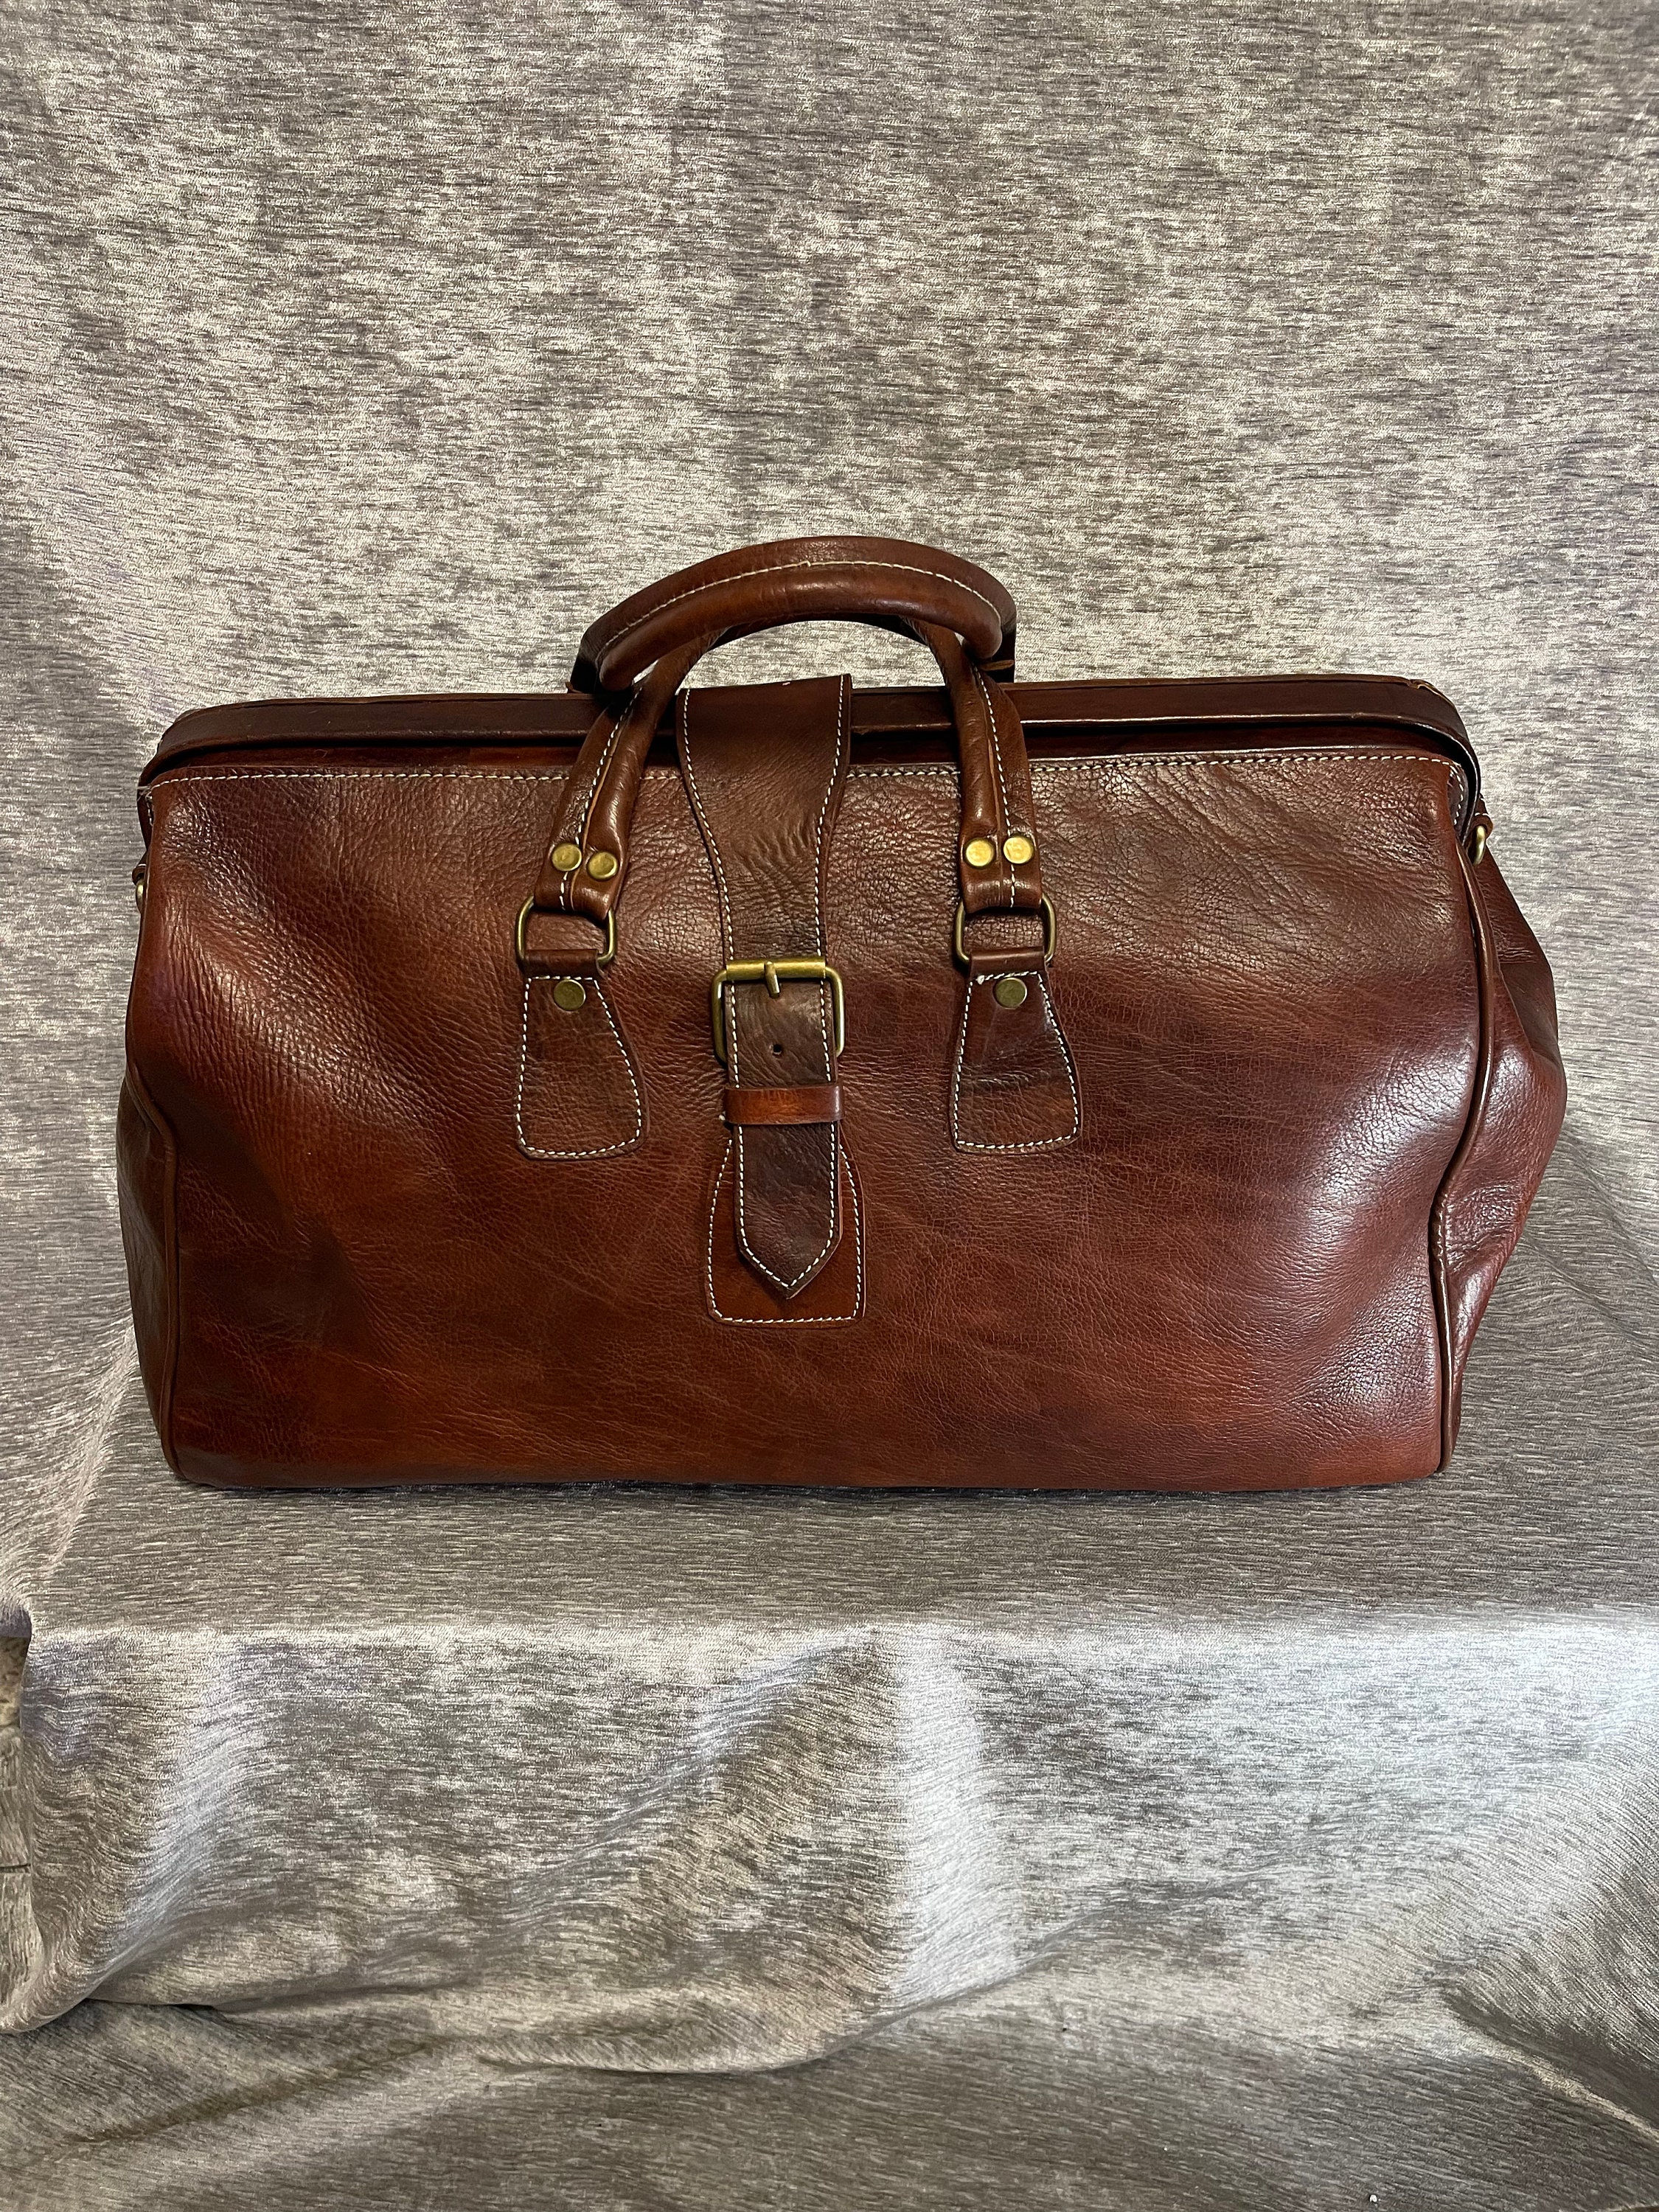 The Darrio Brown Leather Duffle Bag